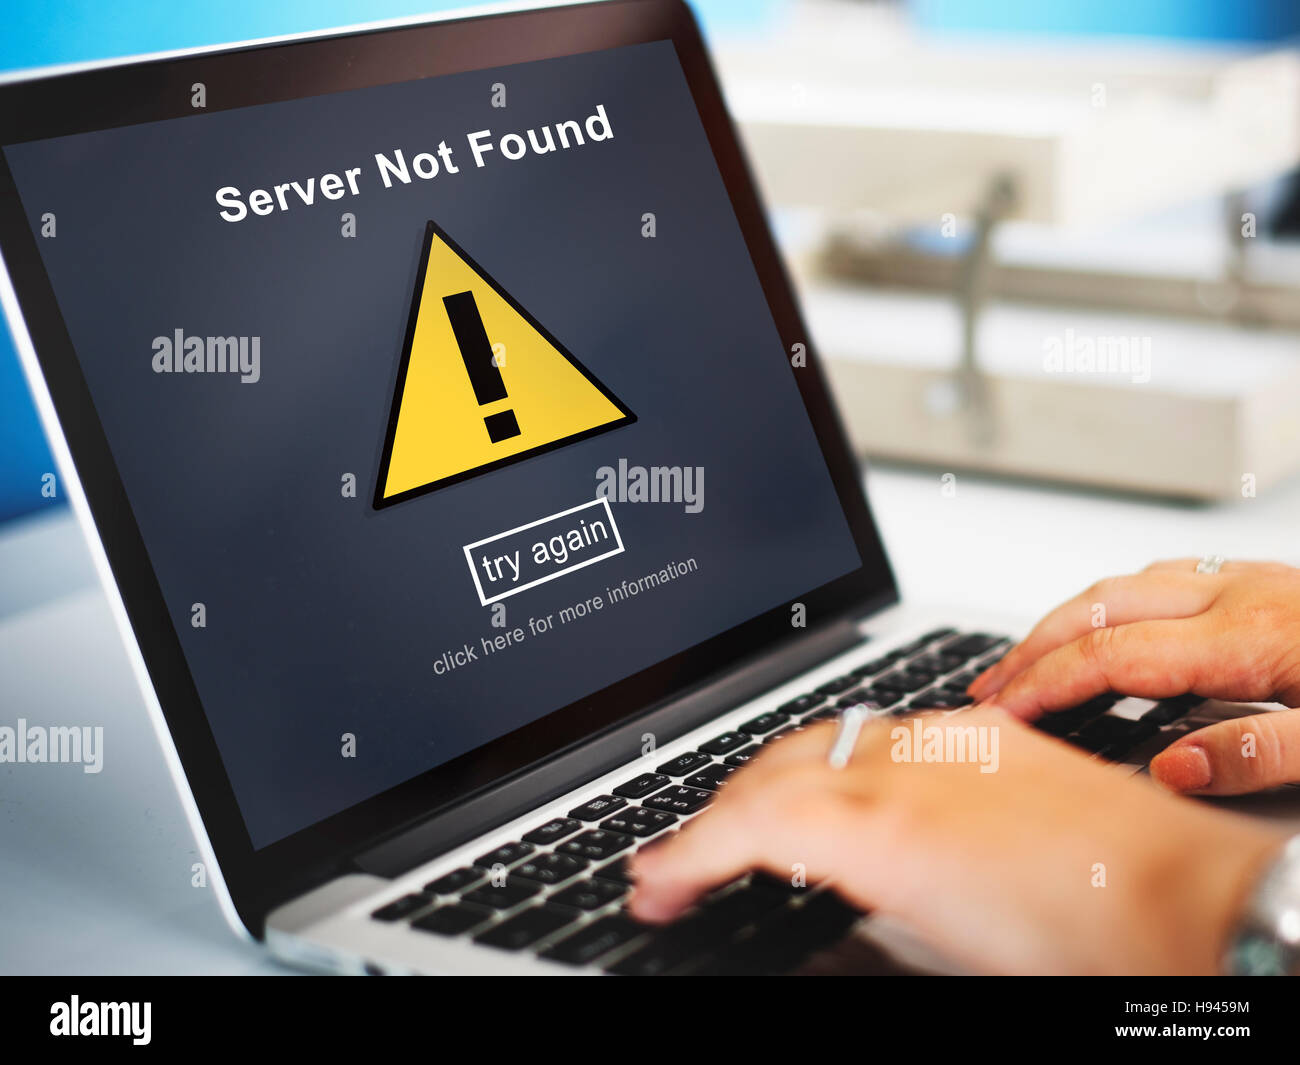 Server Not Found Computer Database Network Concept Stock Photo